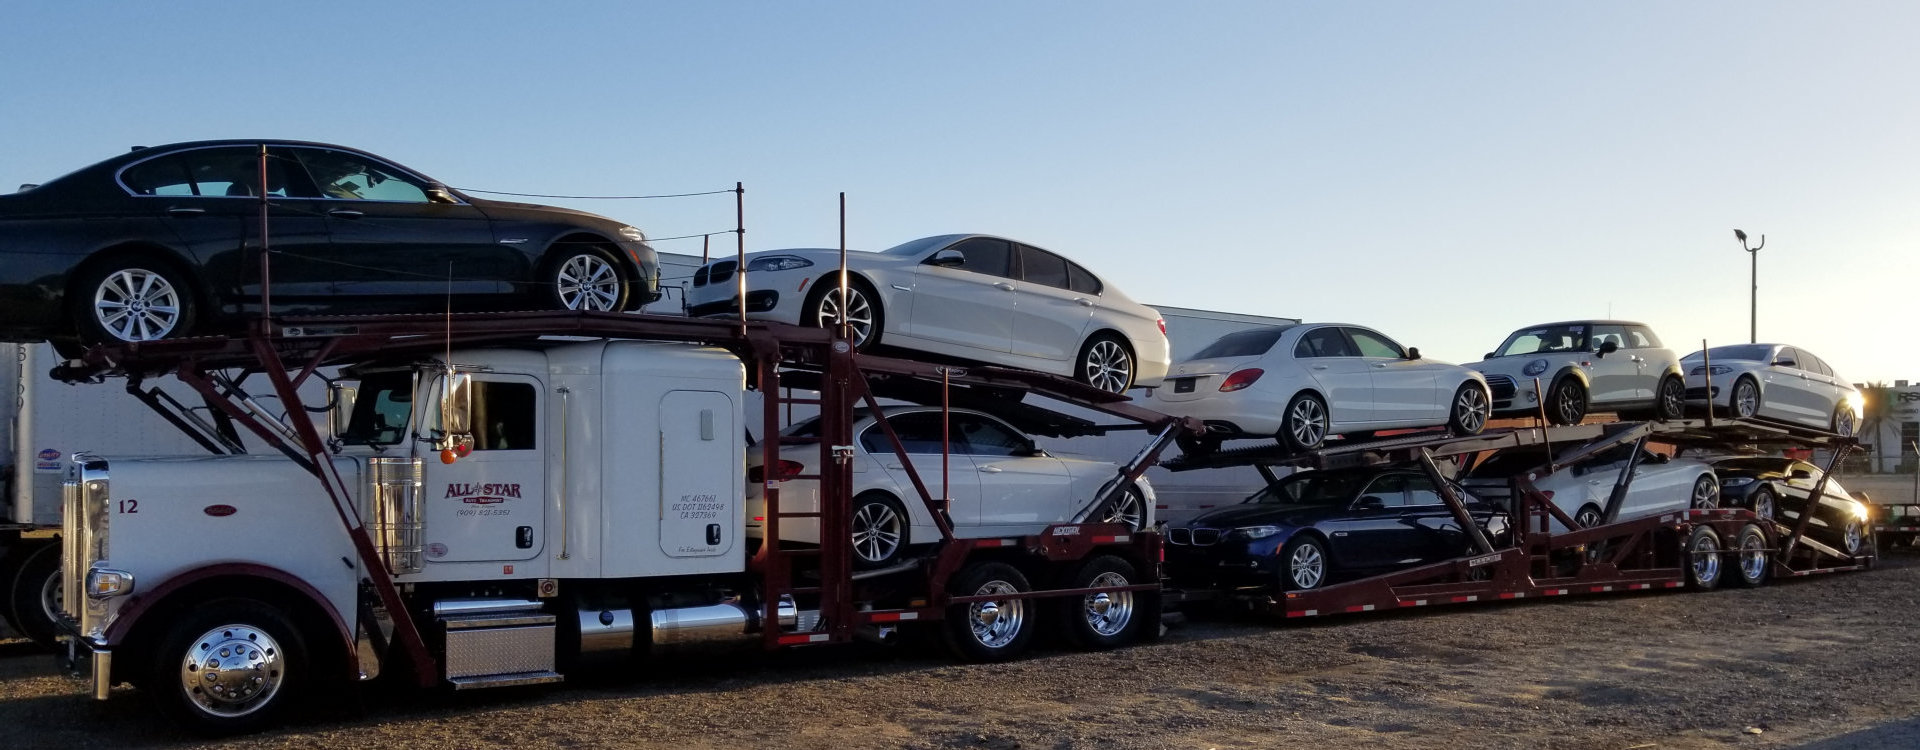 trailer truck loaded with cars